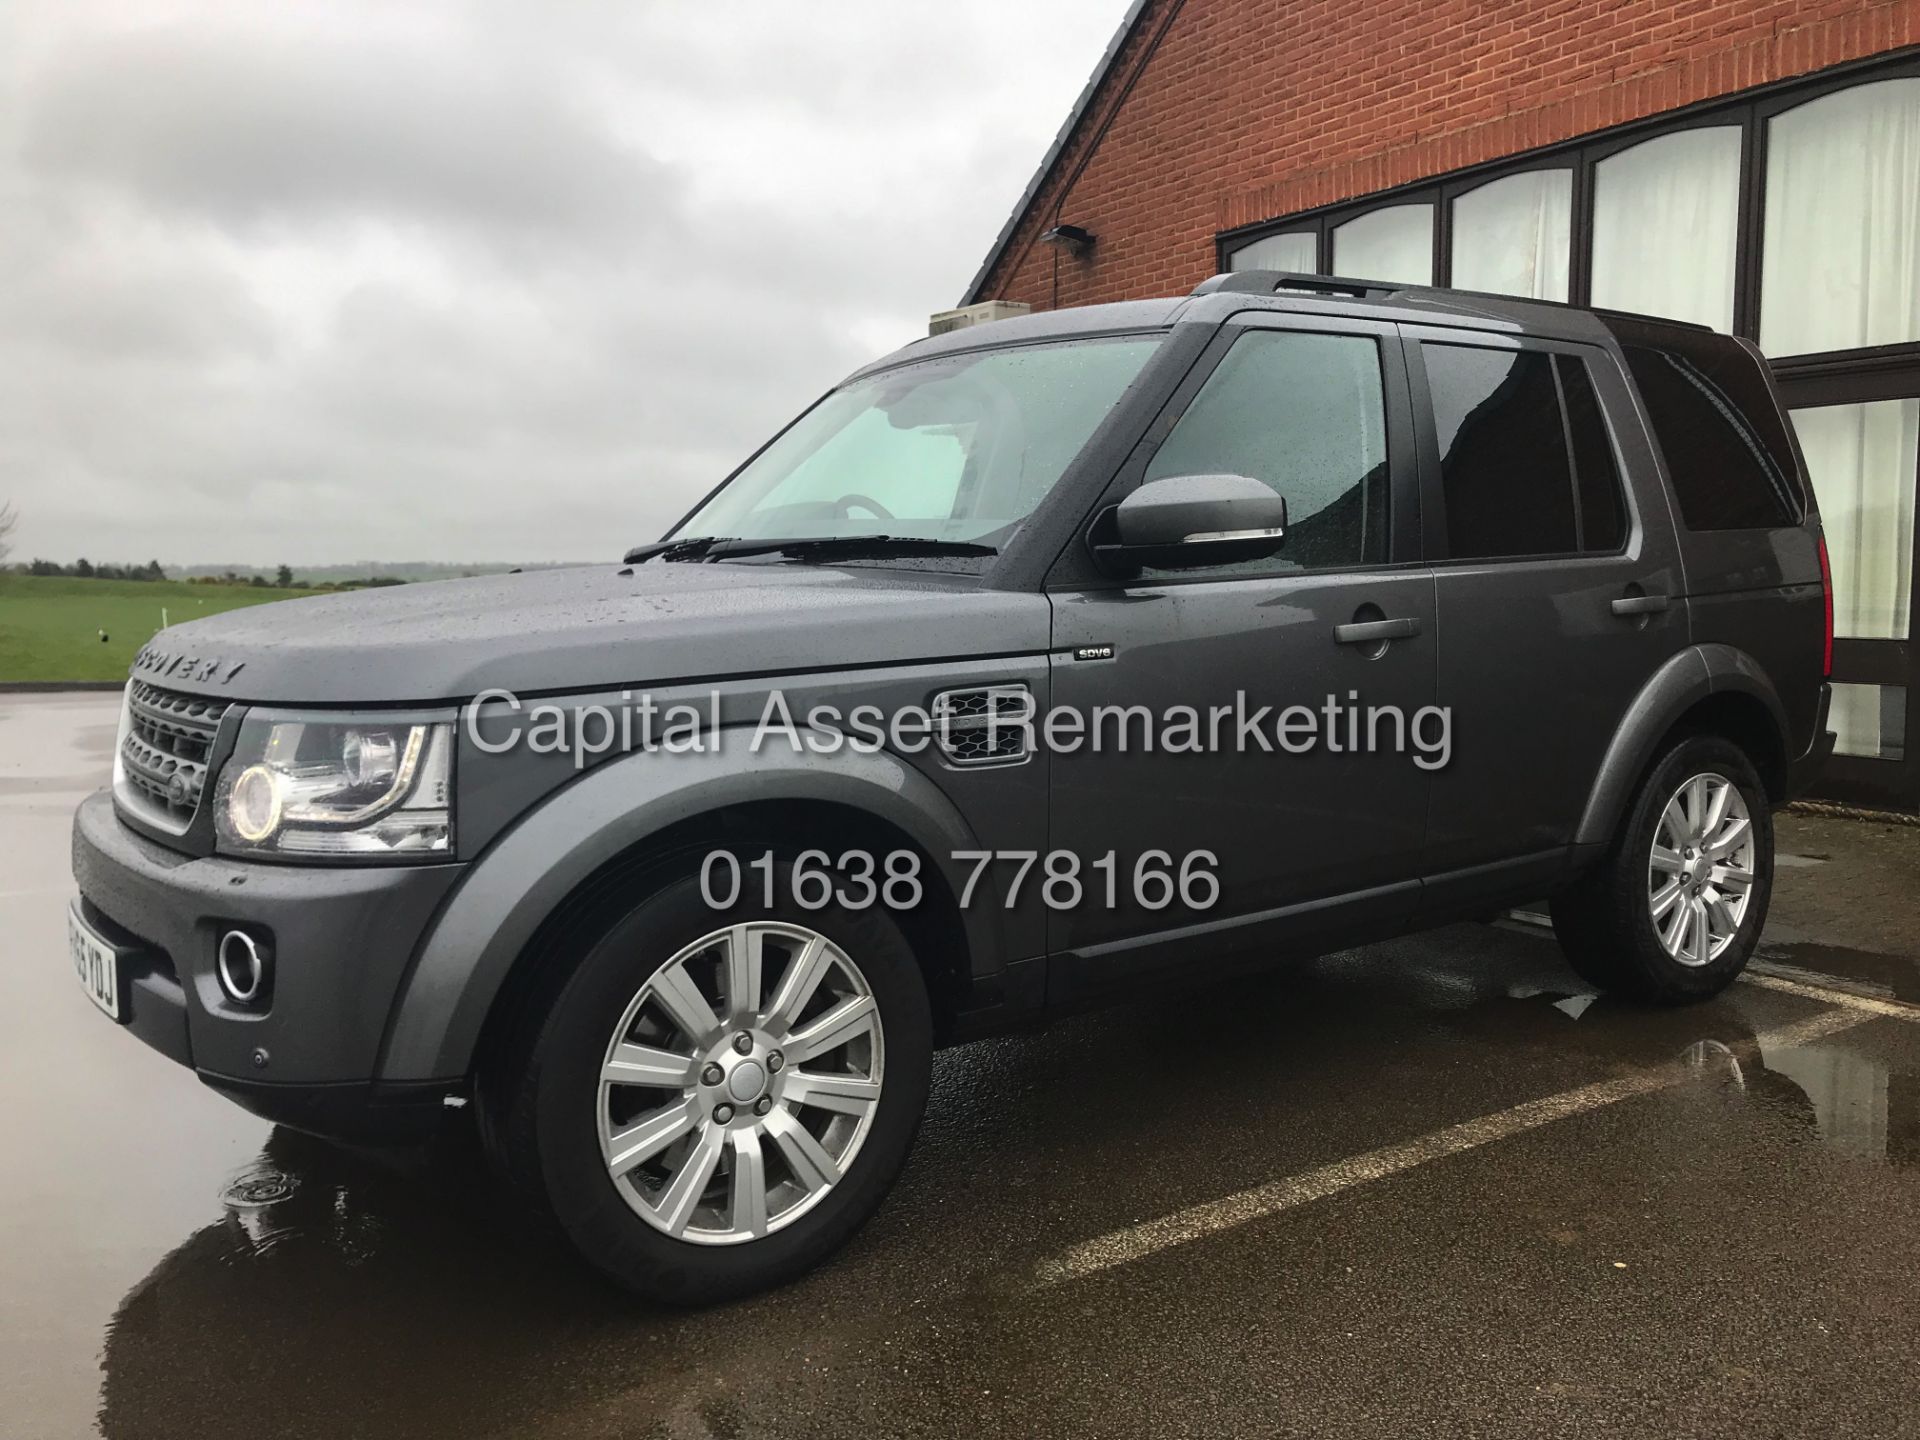 LANDROVER DISCOVERY 4 "SE" AUTO 3.0SDV6 - (2016 REG) 1 KEEPER - SAT NAV - LEATHER - HUGE SPEC -WOW! - Image 2 of 20